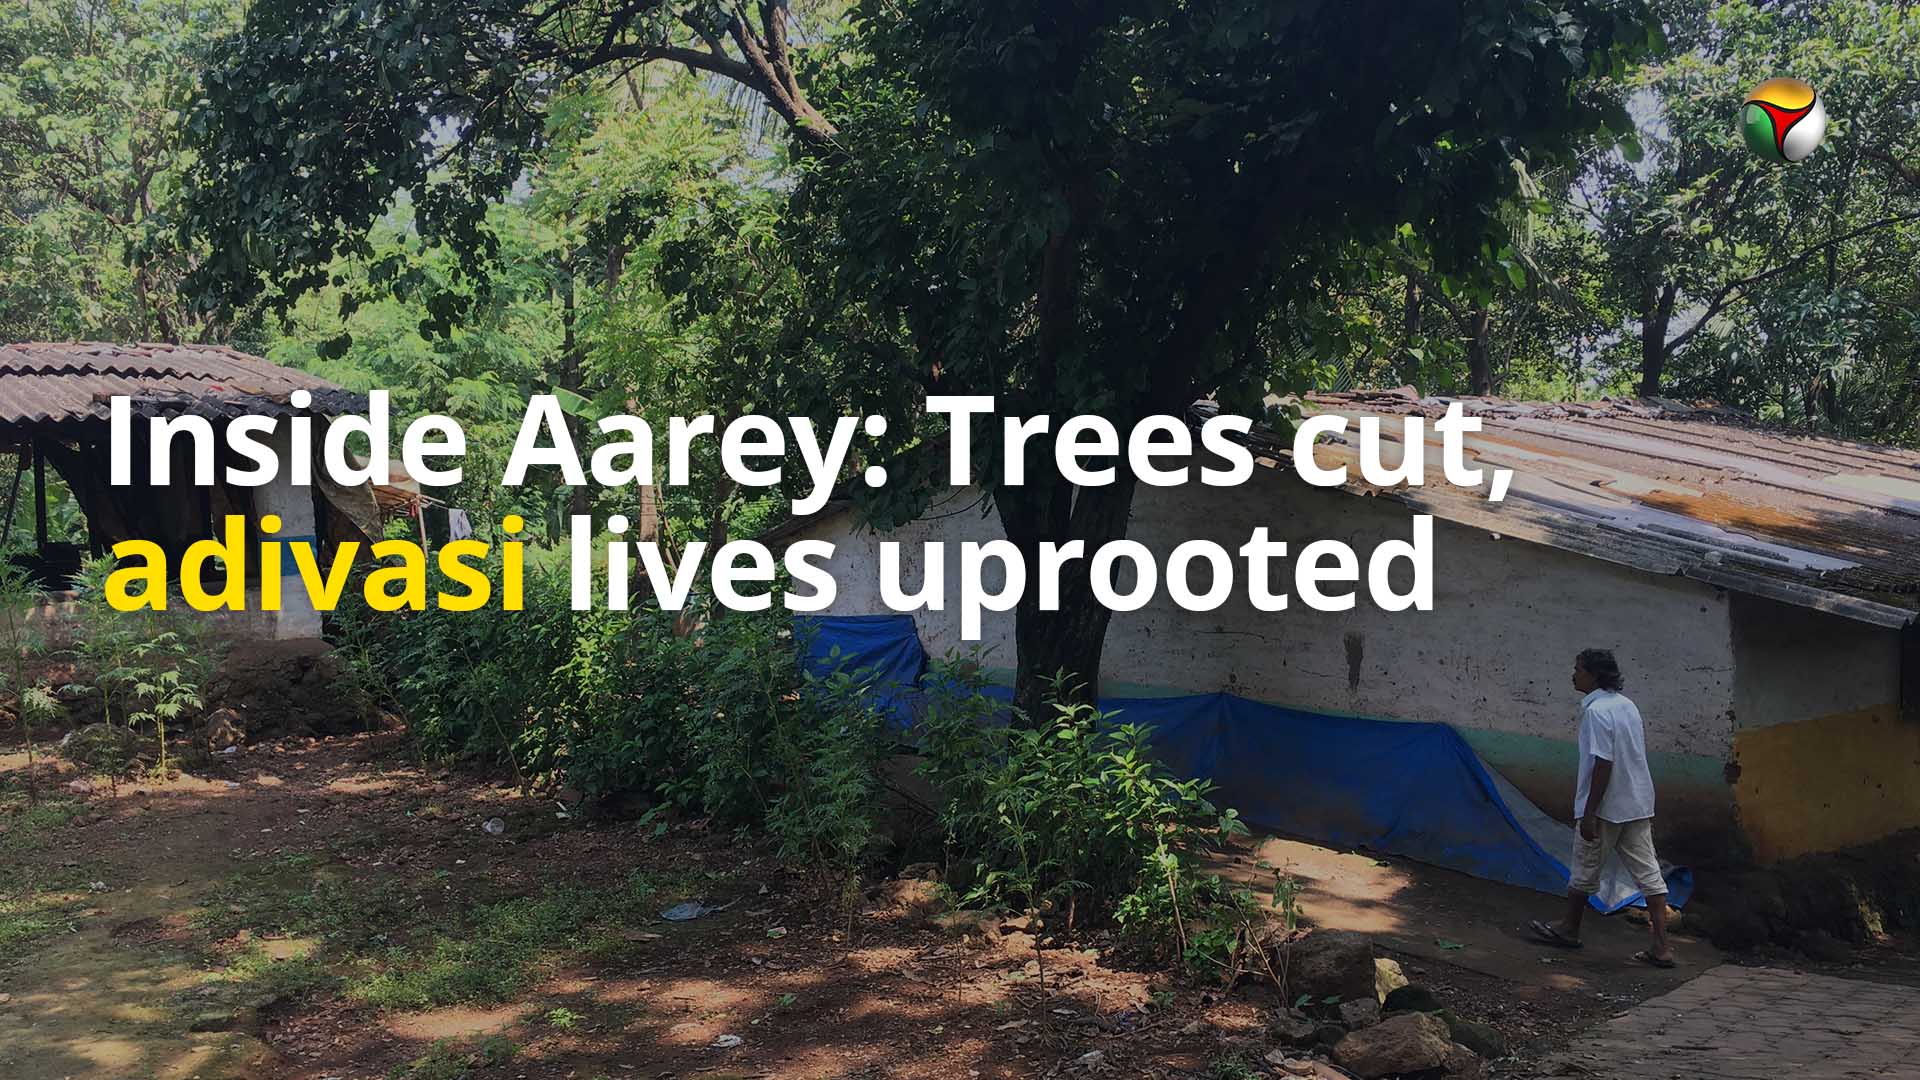 Inside Aarey forest: Trees cut, lives uprooted for adivasis